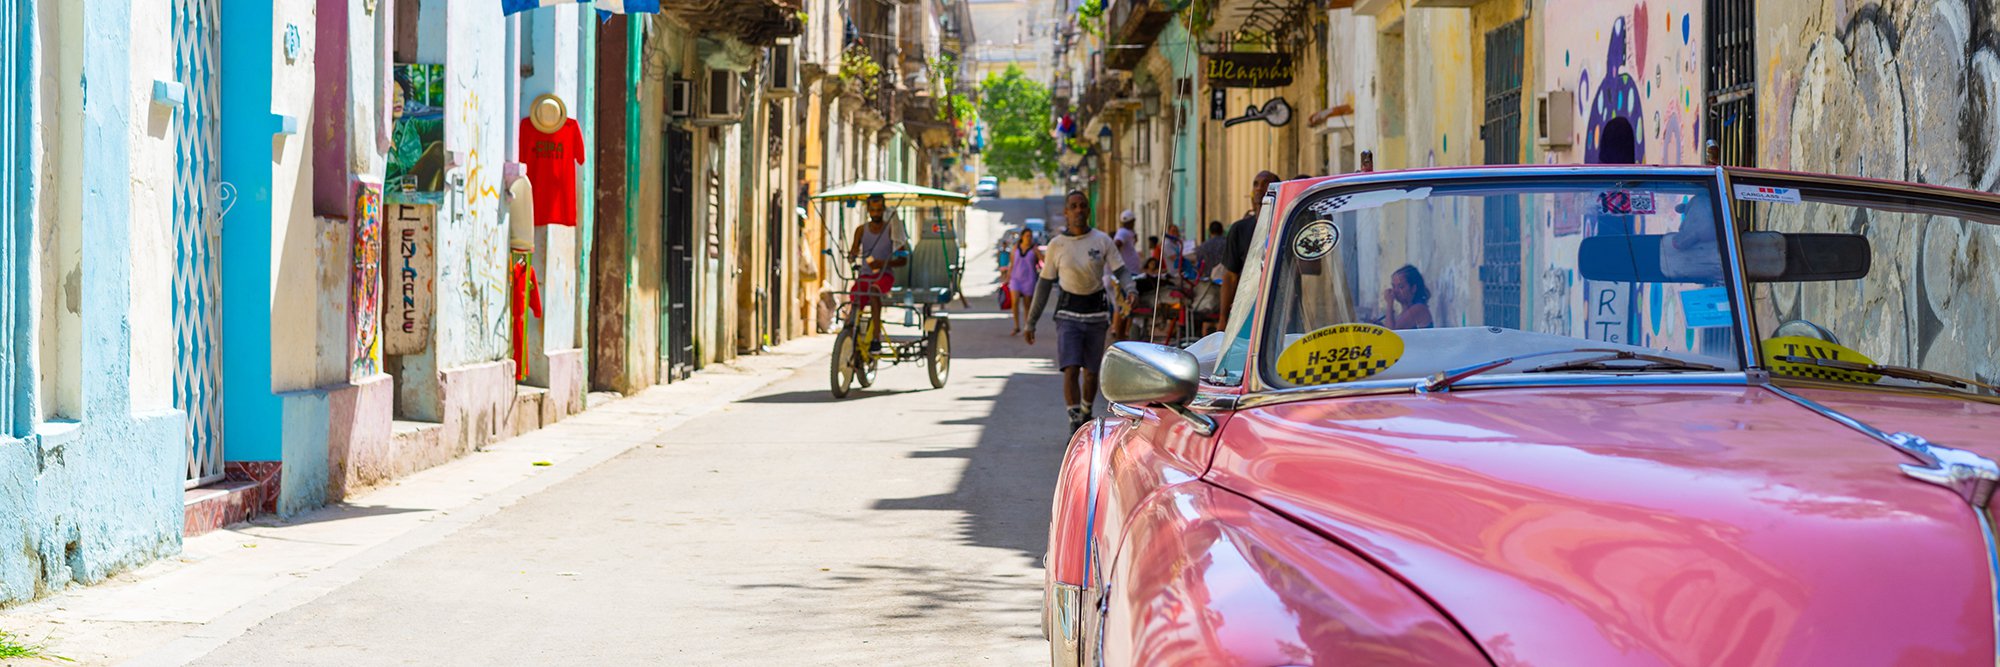 cuban street with vibrant colors